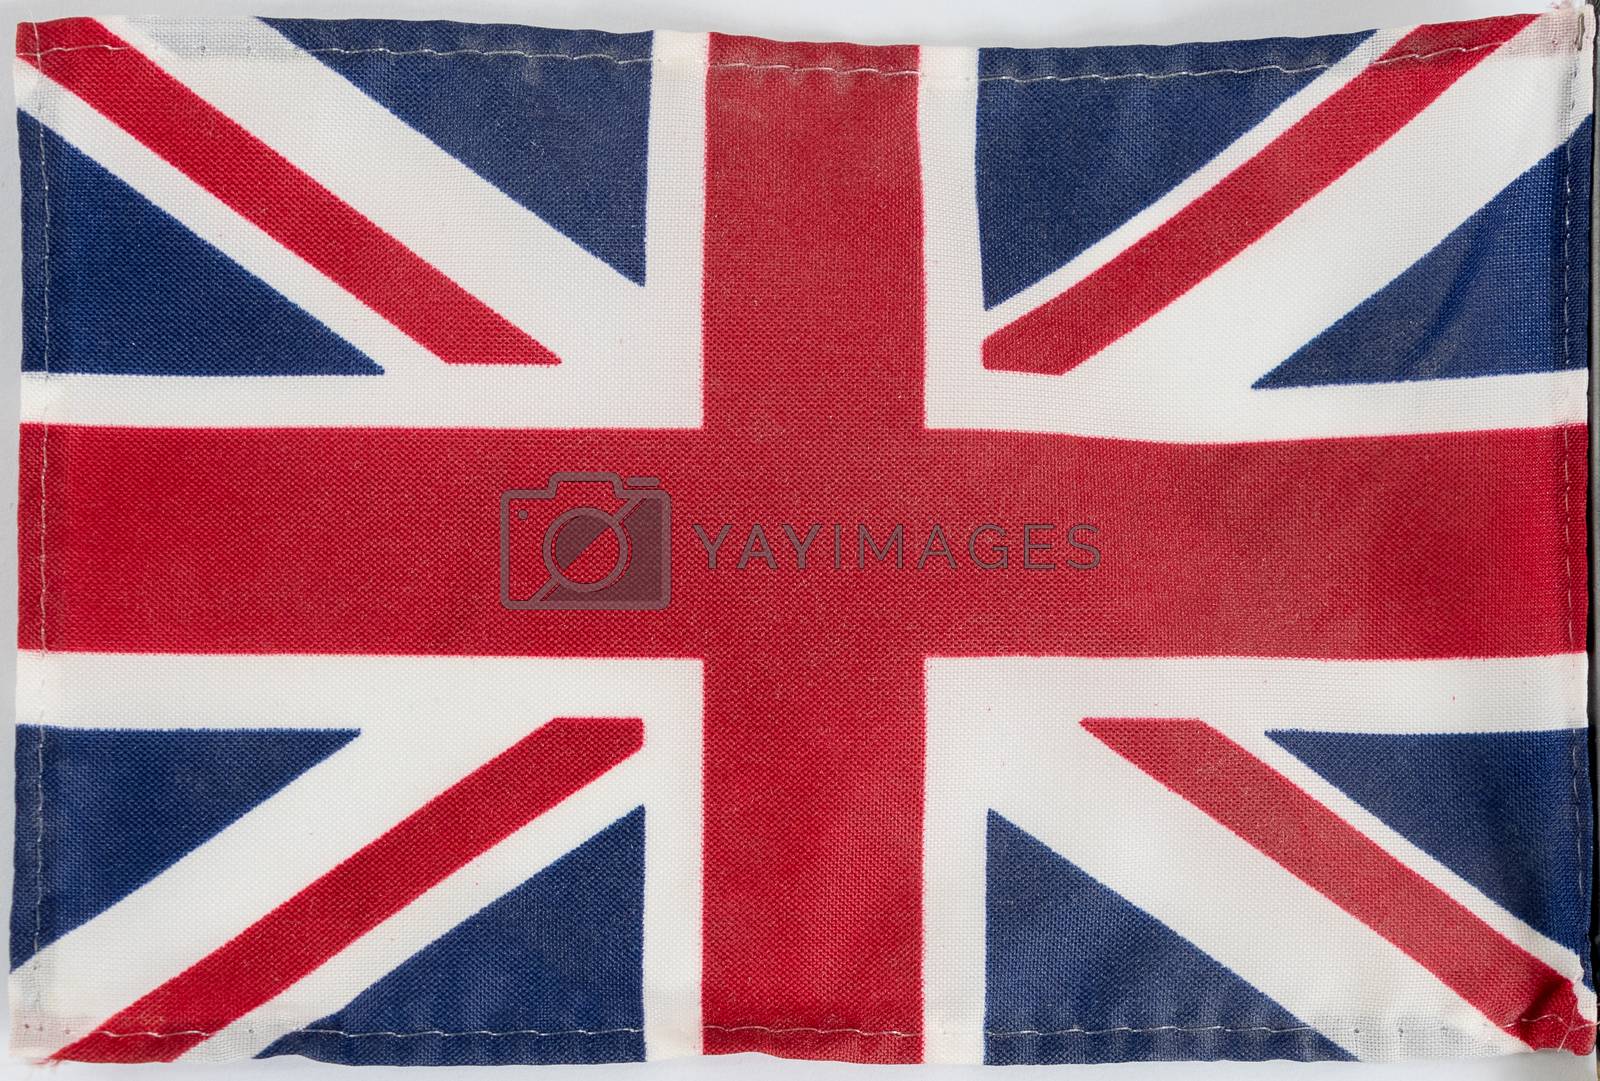 Royalty free image of Union Jack Flag by Russell102